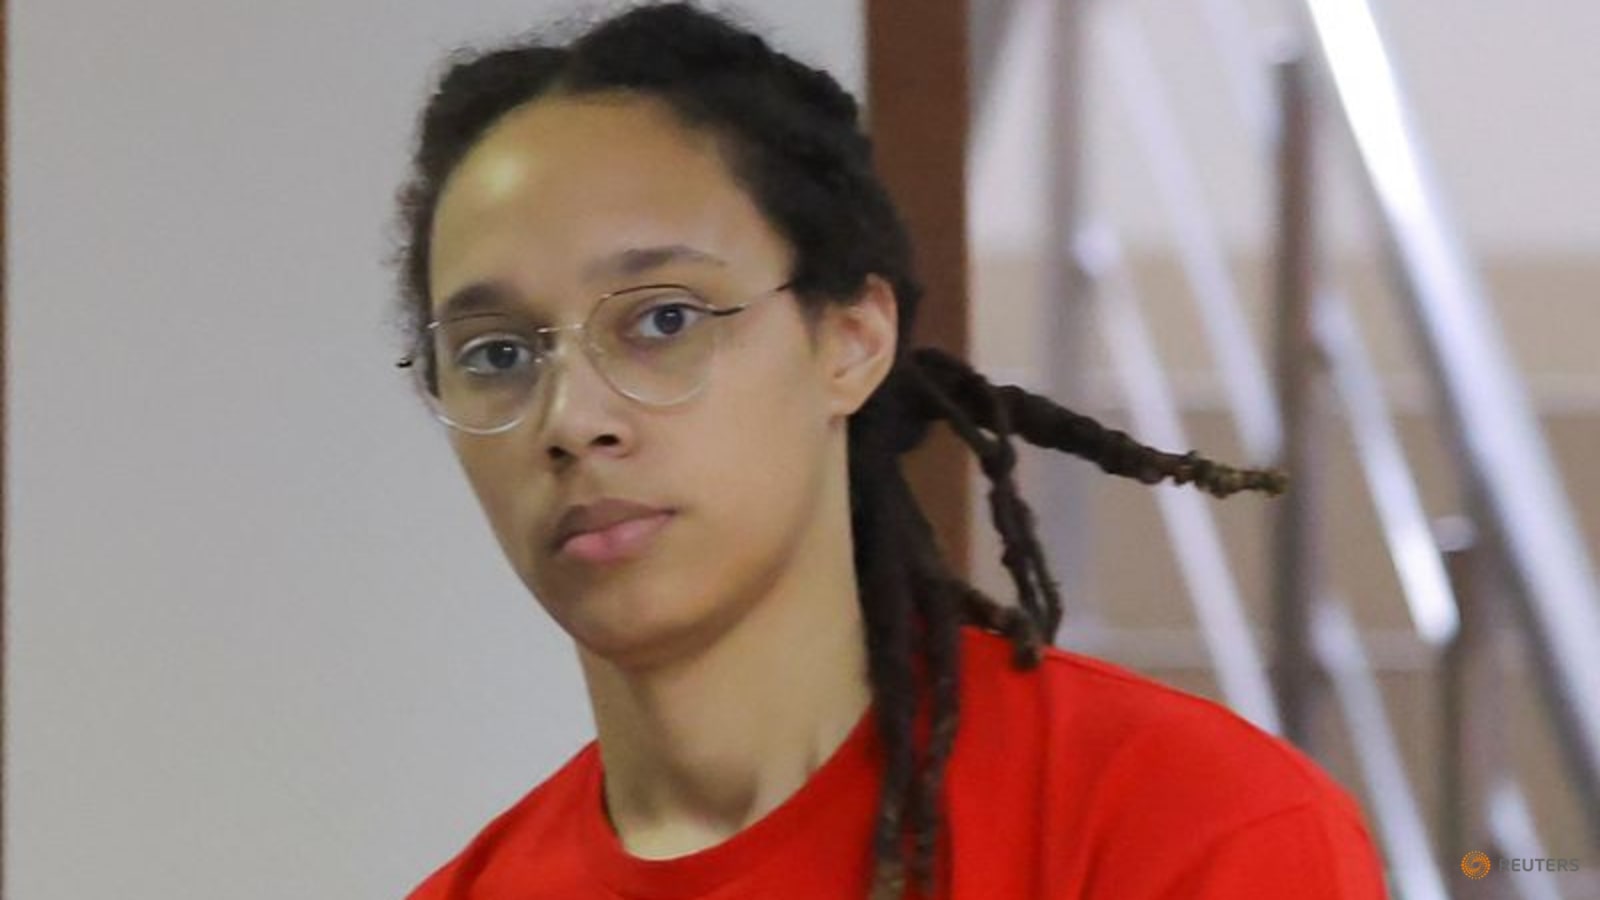 us-basketball-star-griner-admits-russian-drugs-charge-but-denies-intent